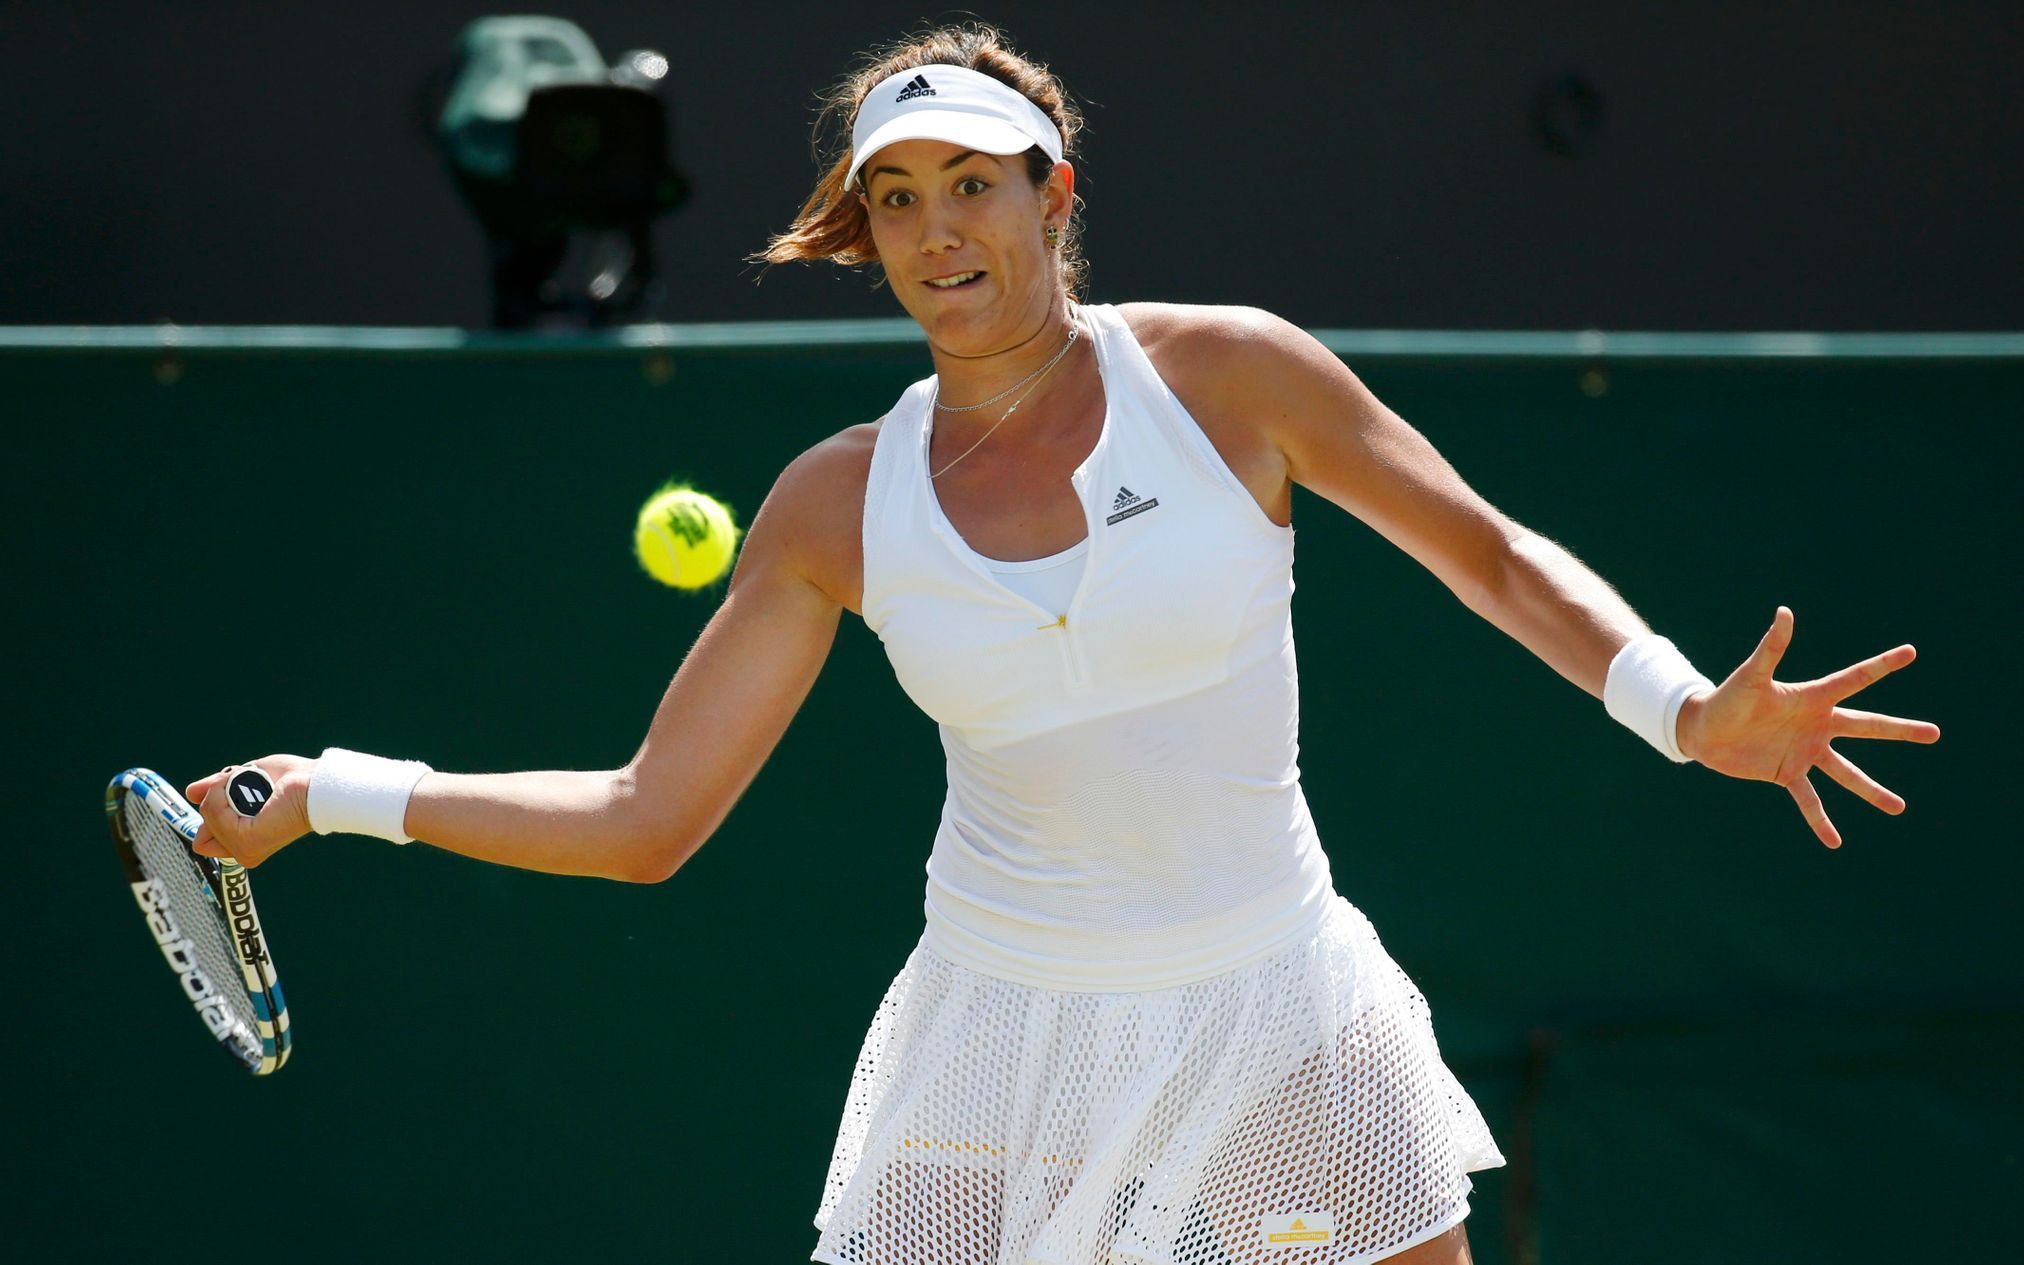 Garbine Muguruza of Spain hits a shot during her match against Angelique Kerber of Germany at the Wimbledon Tennis Championships in London